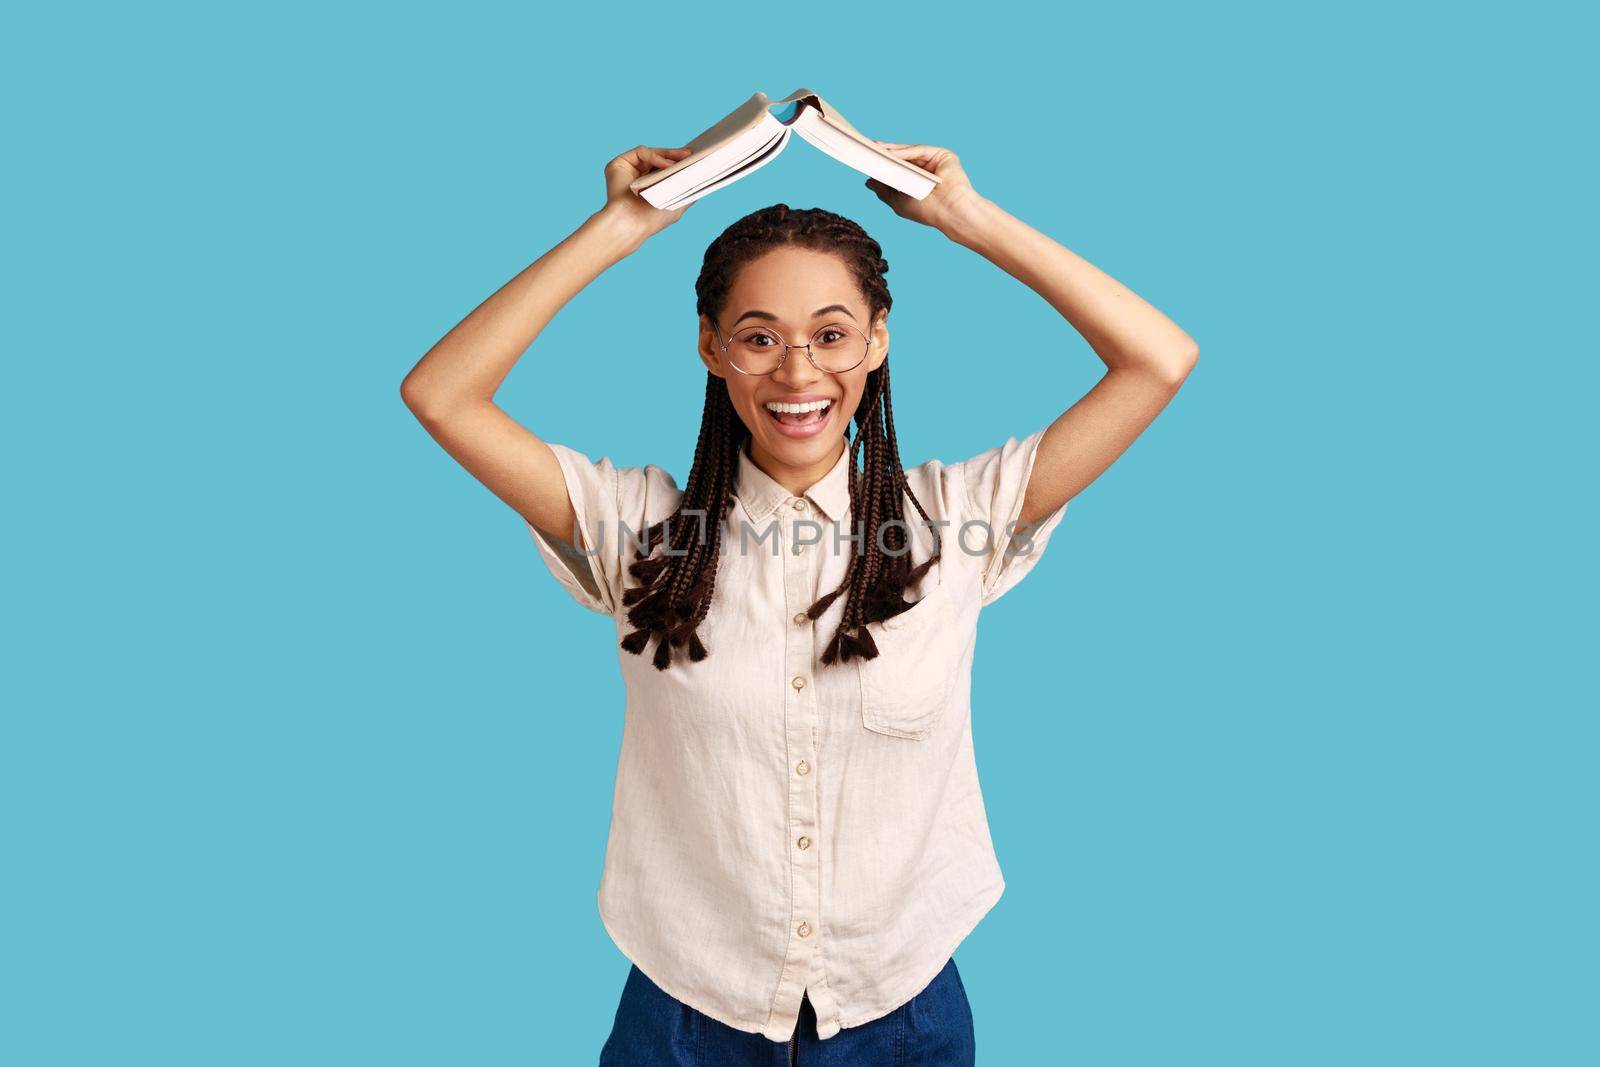 Portrait of positive woman with black dreadlocks and eyeglasses, standing holding book over head, studying and education, wearing white shirt. Indoor studio shot isolated on blue background.